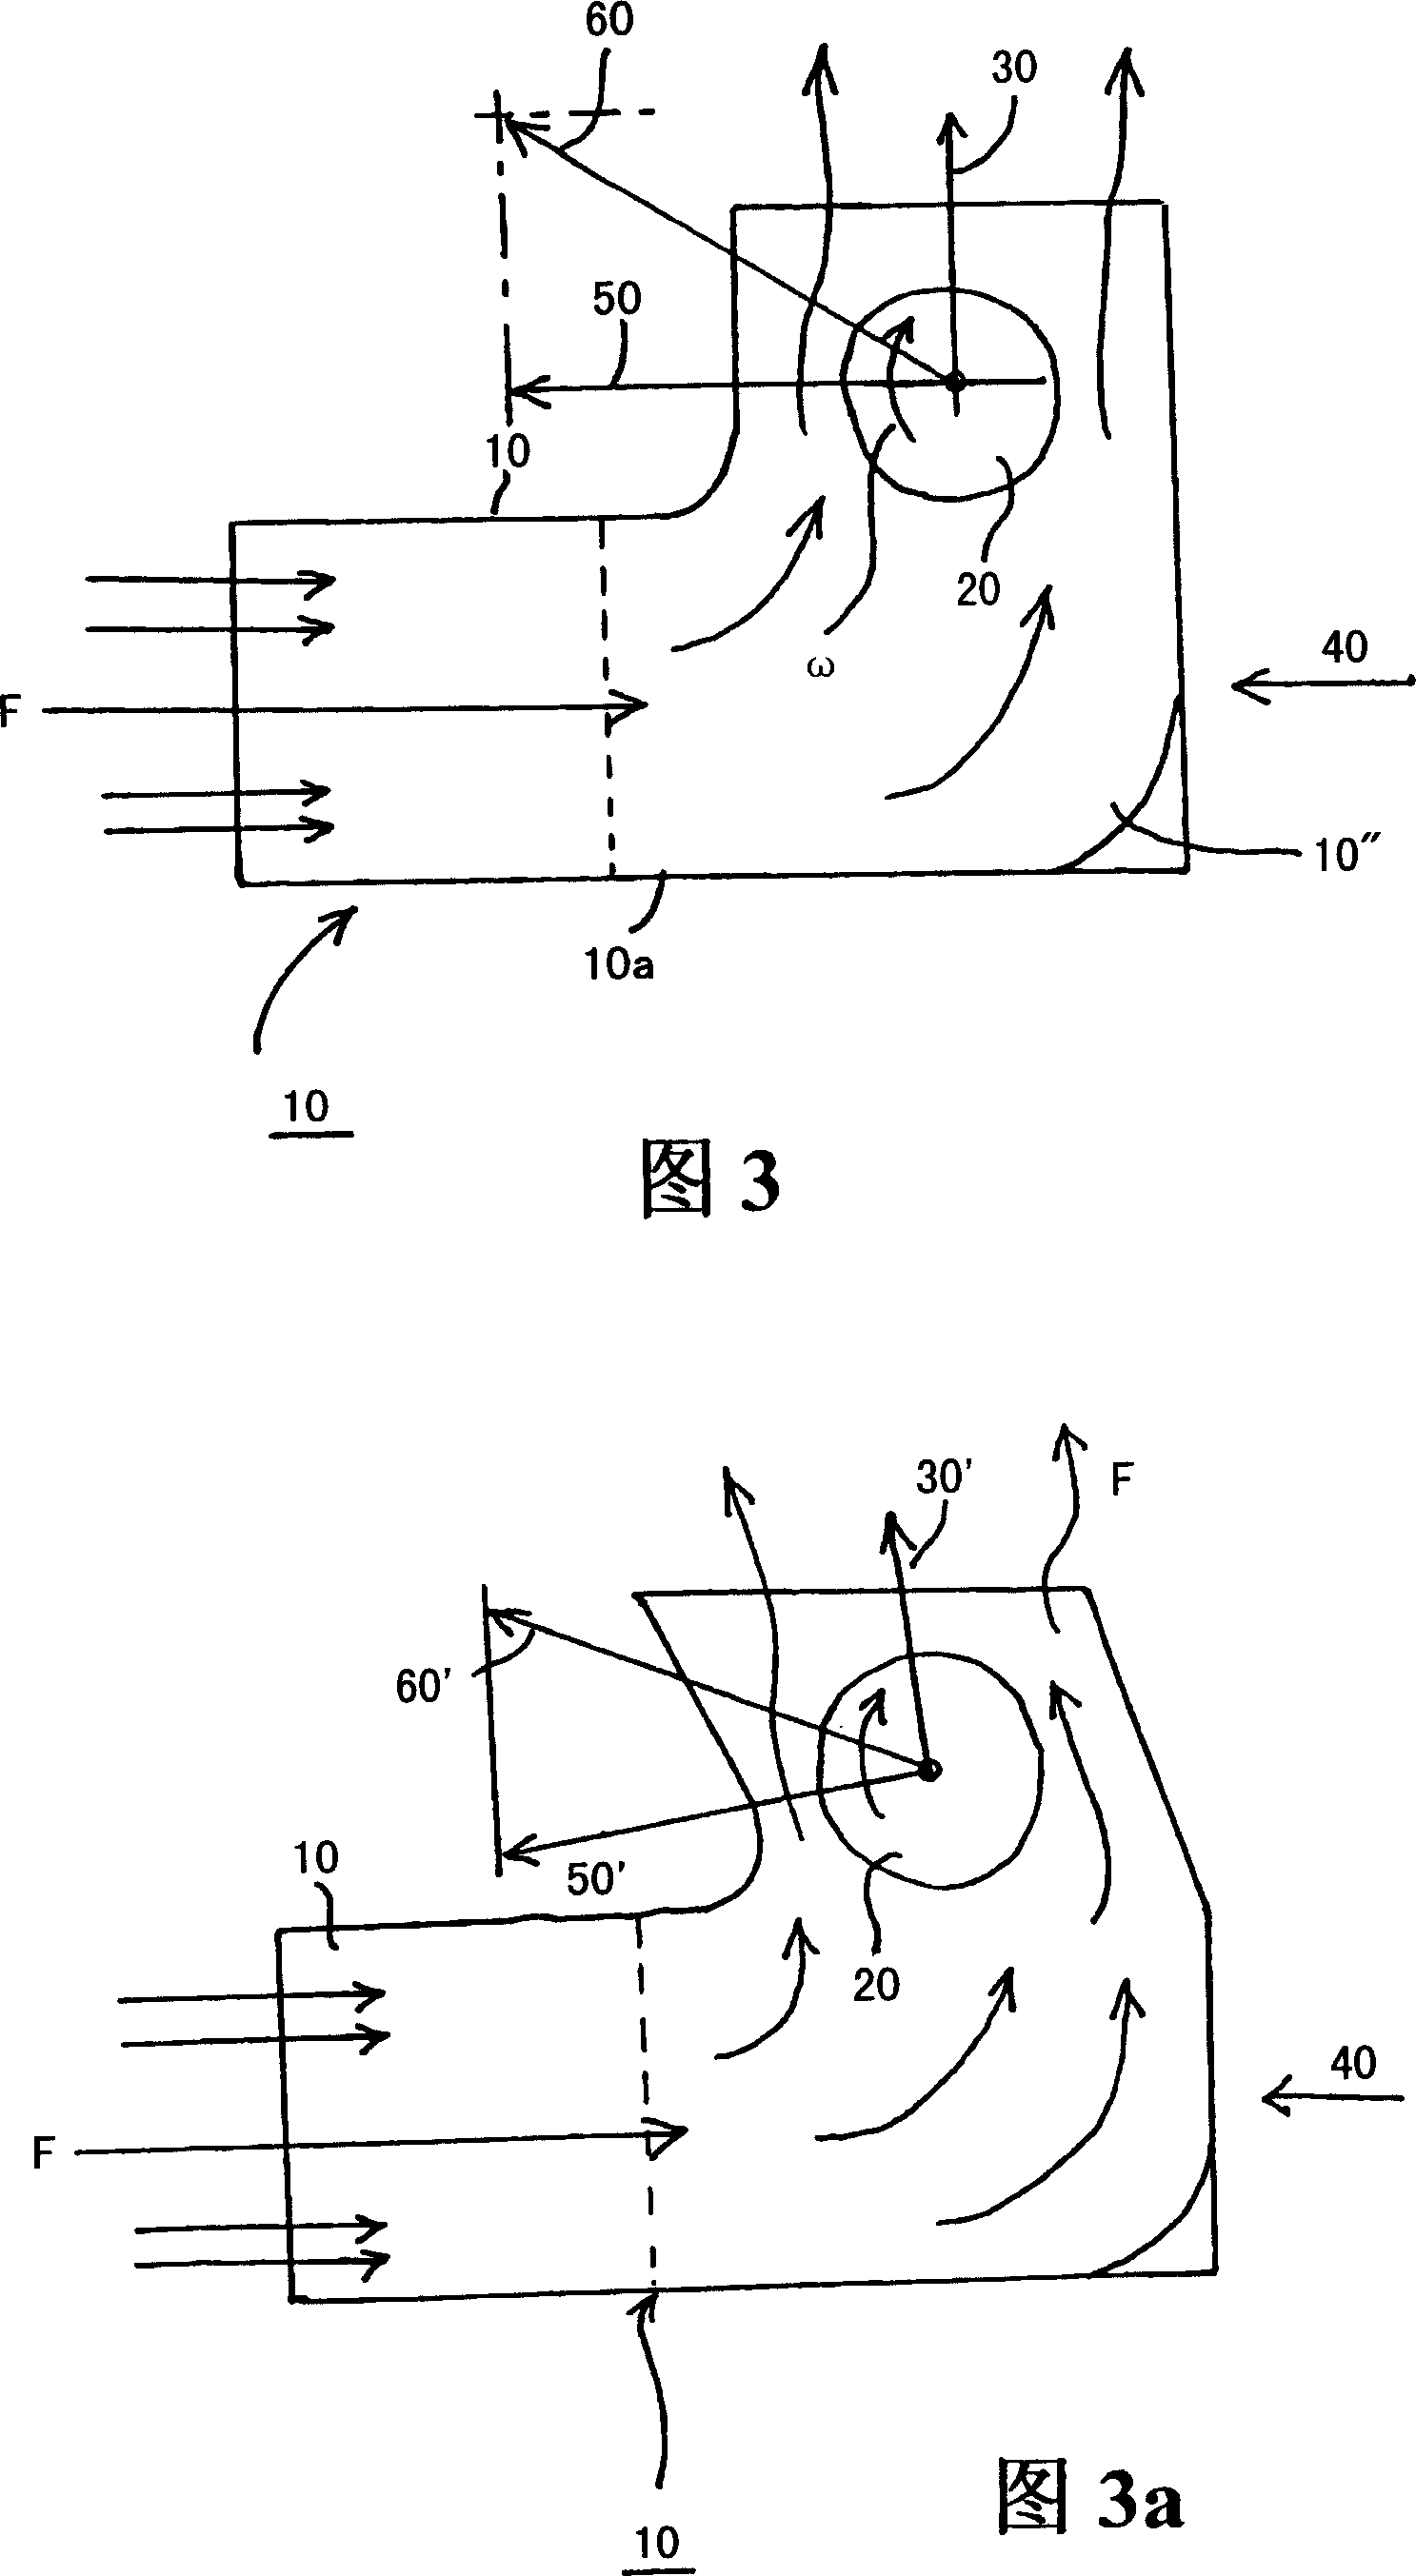 Additional drive system by diverting a fluid flow